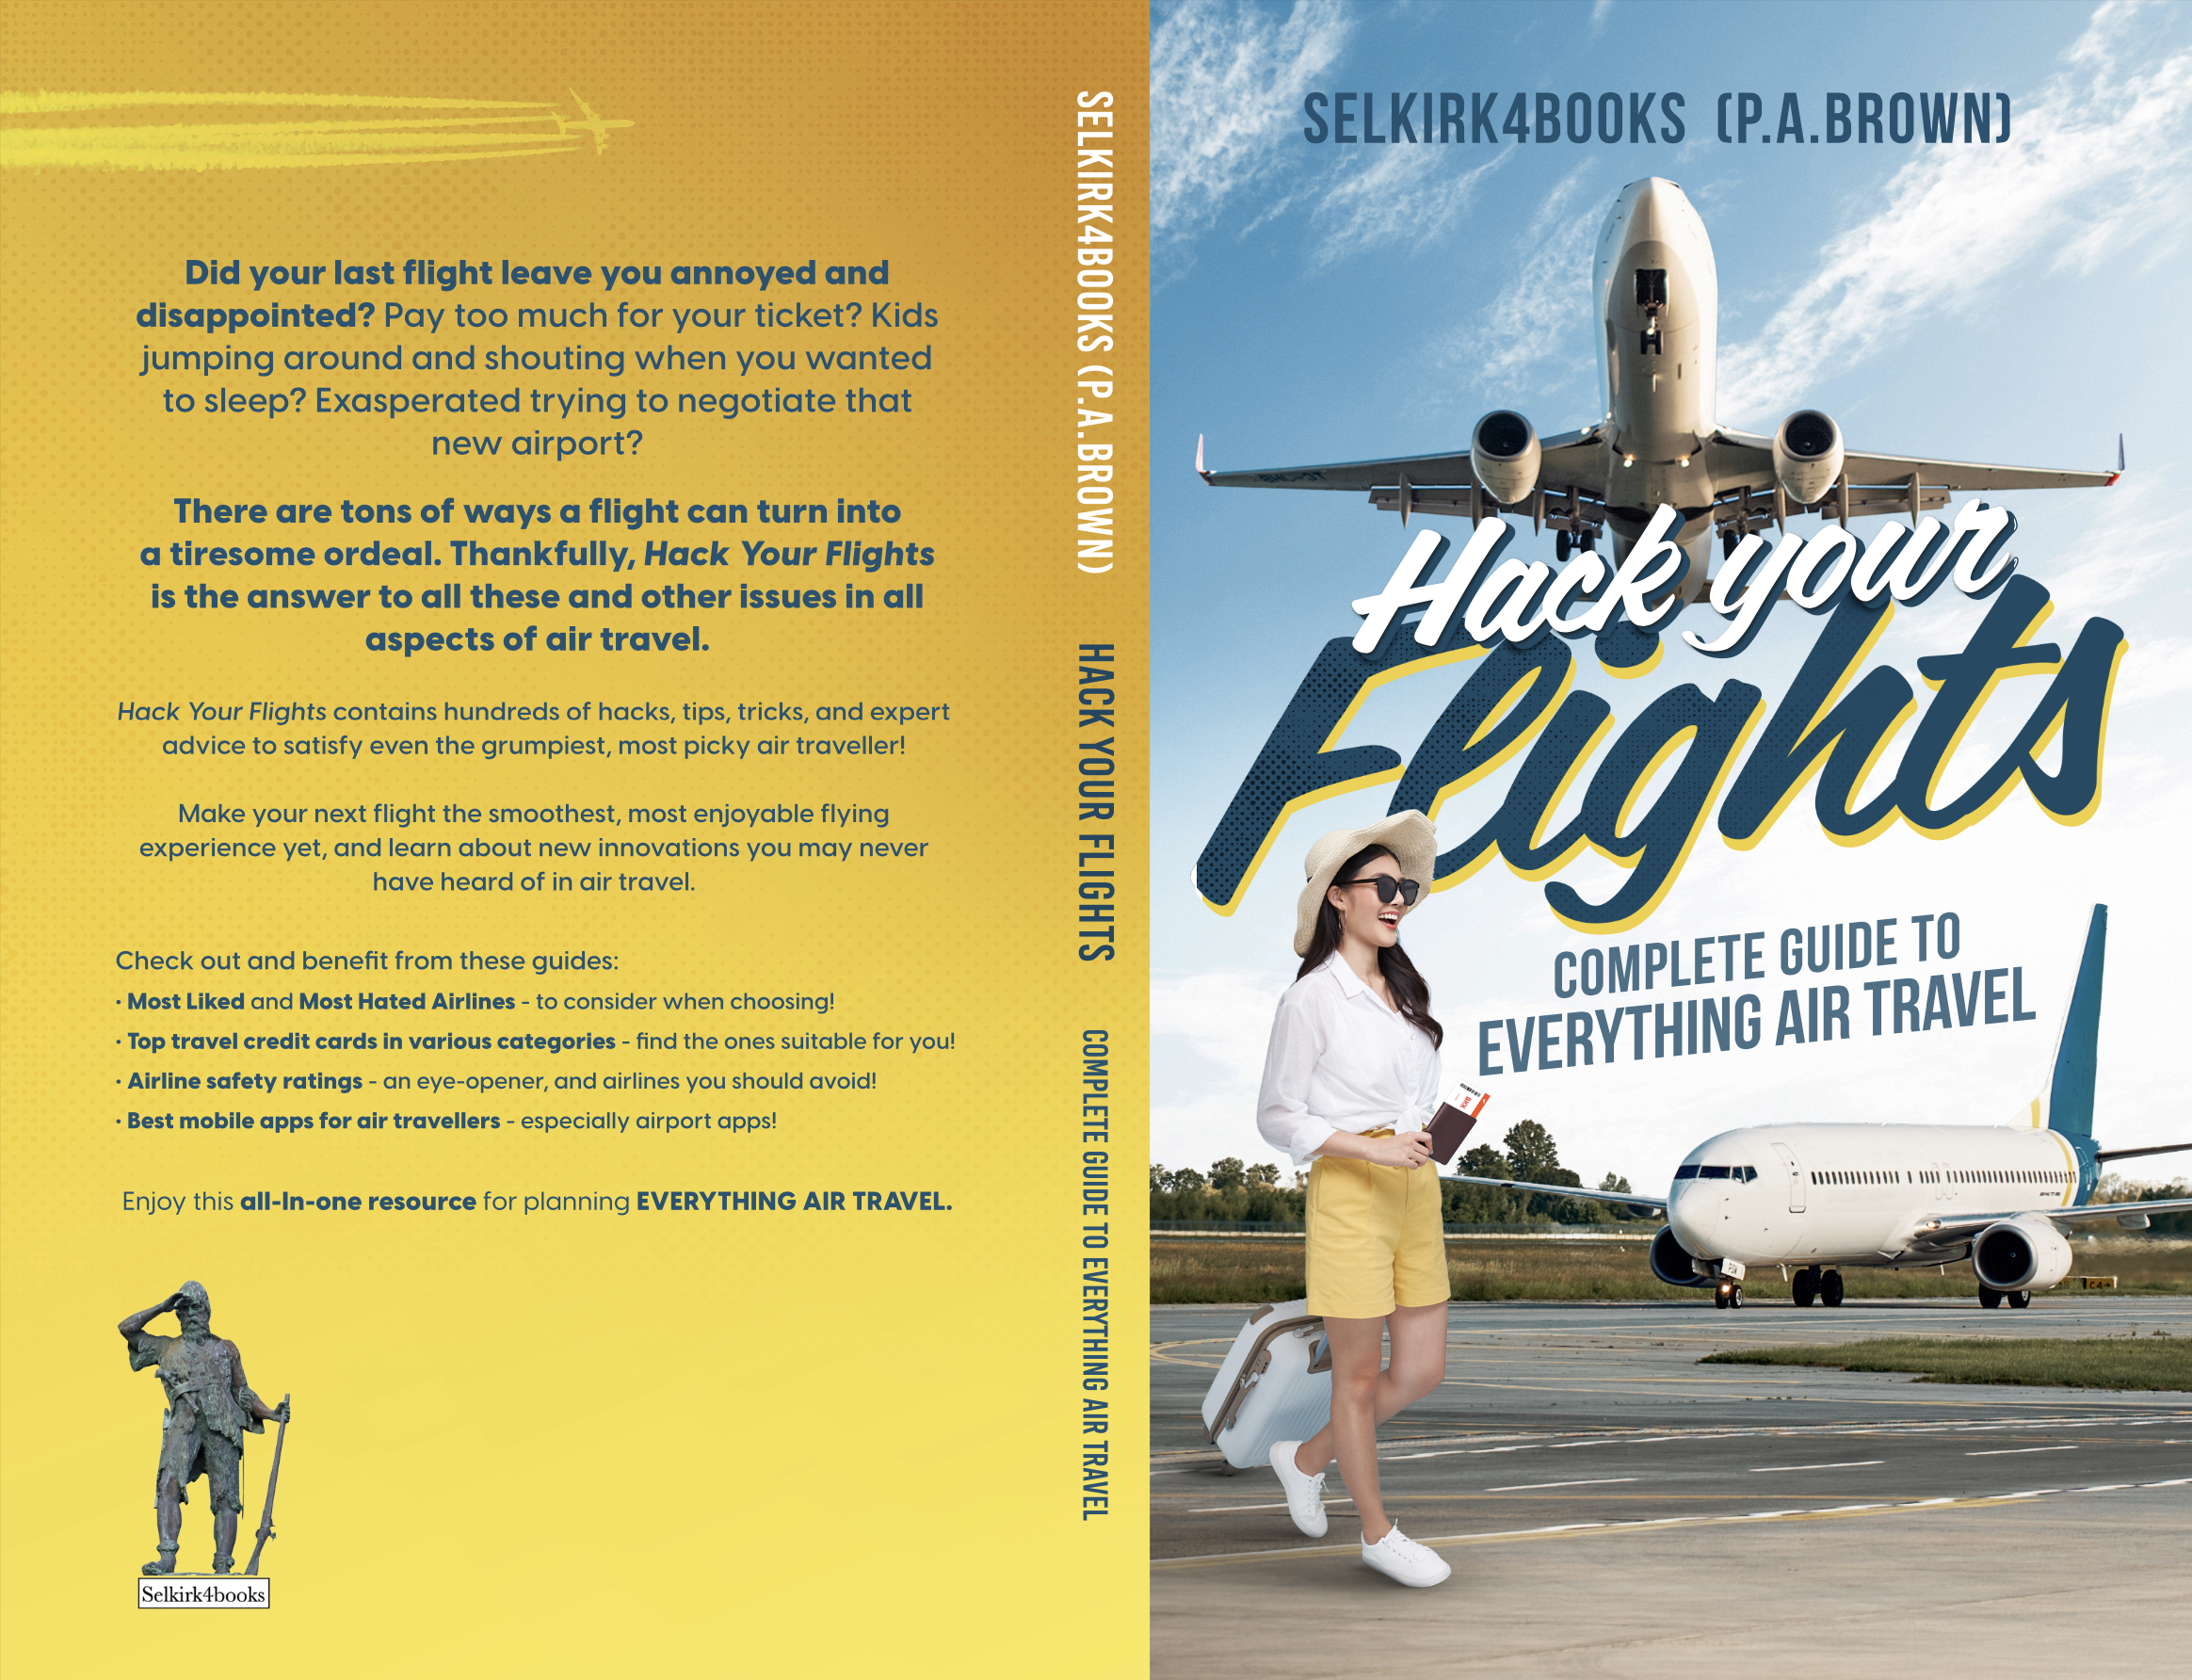 Hack Your Flights cover